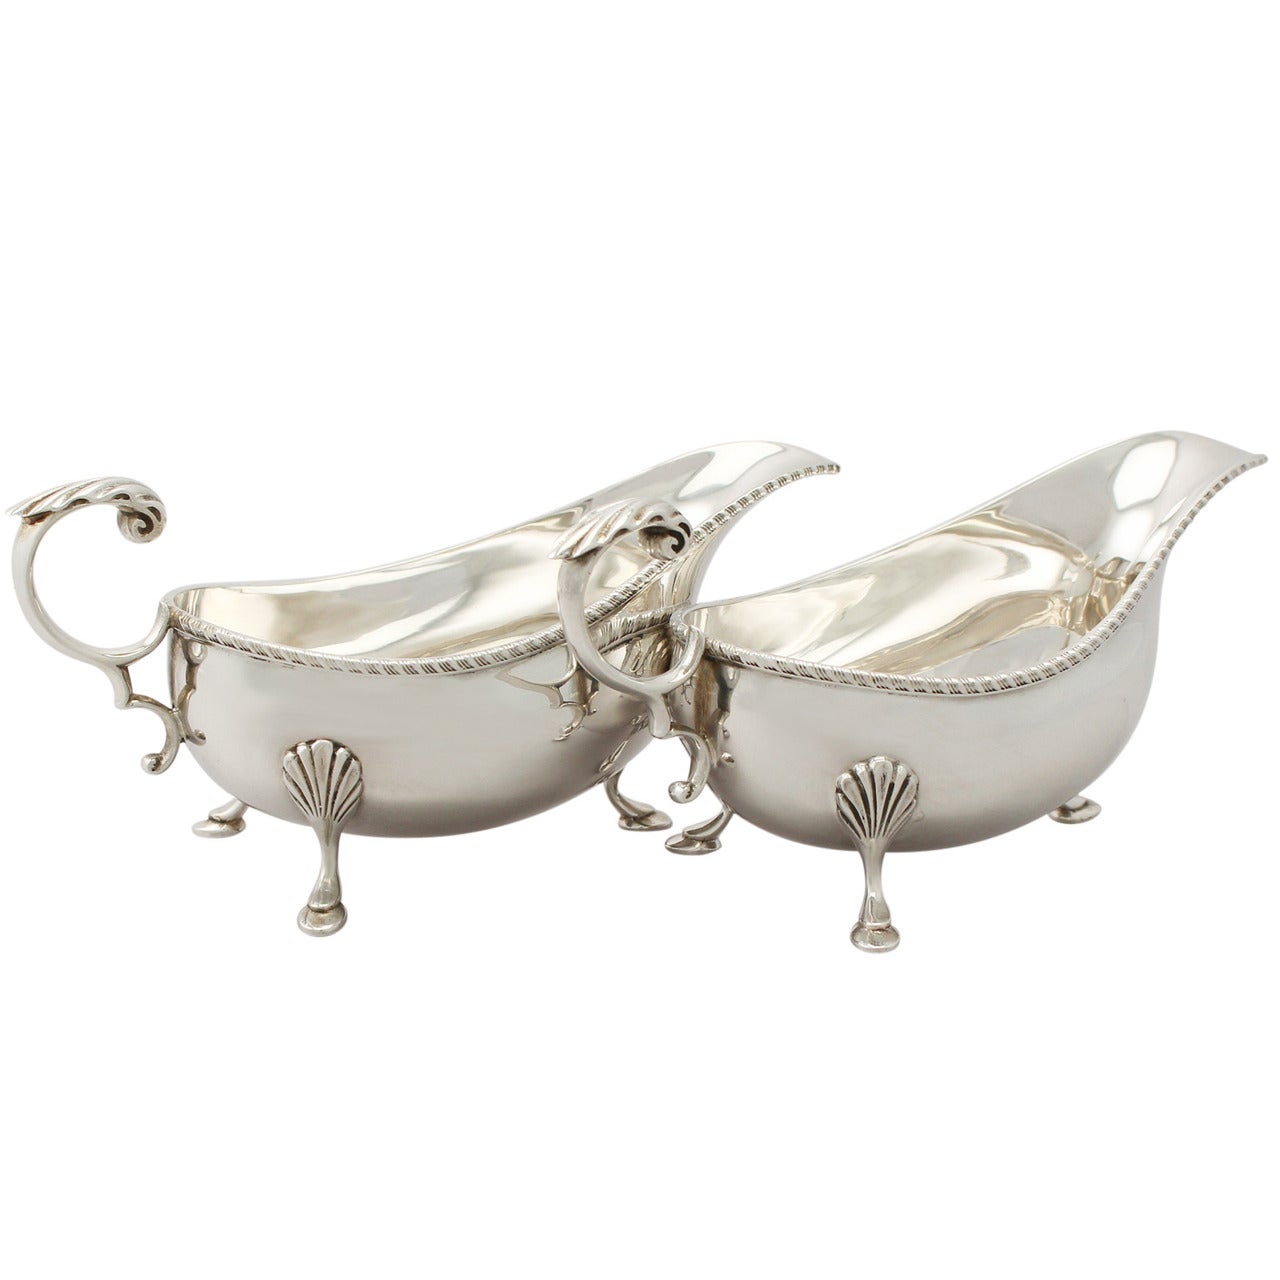 Vintage 1960s Sterling Silver Sauceboats / Gravy Boats